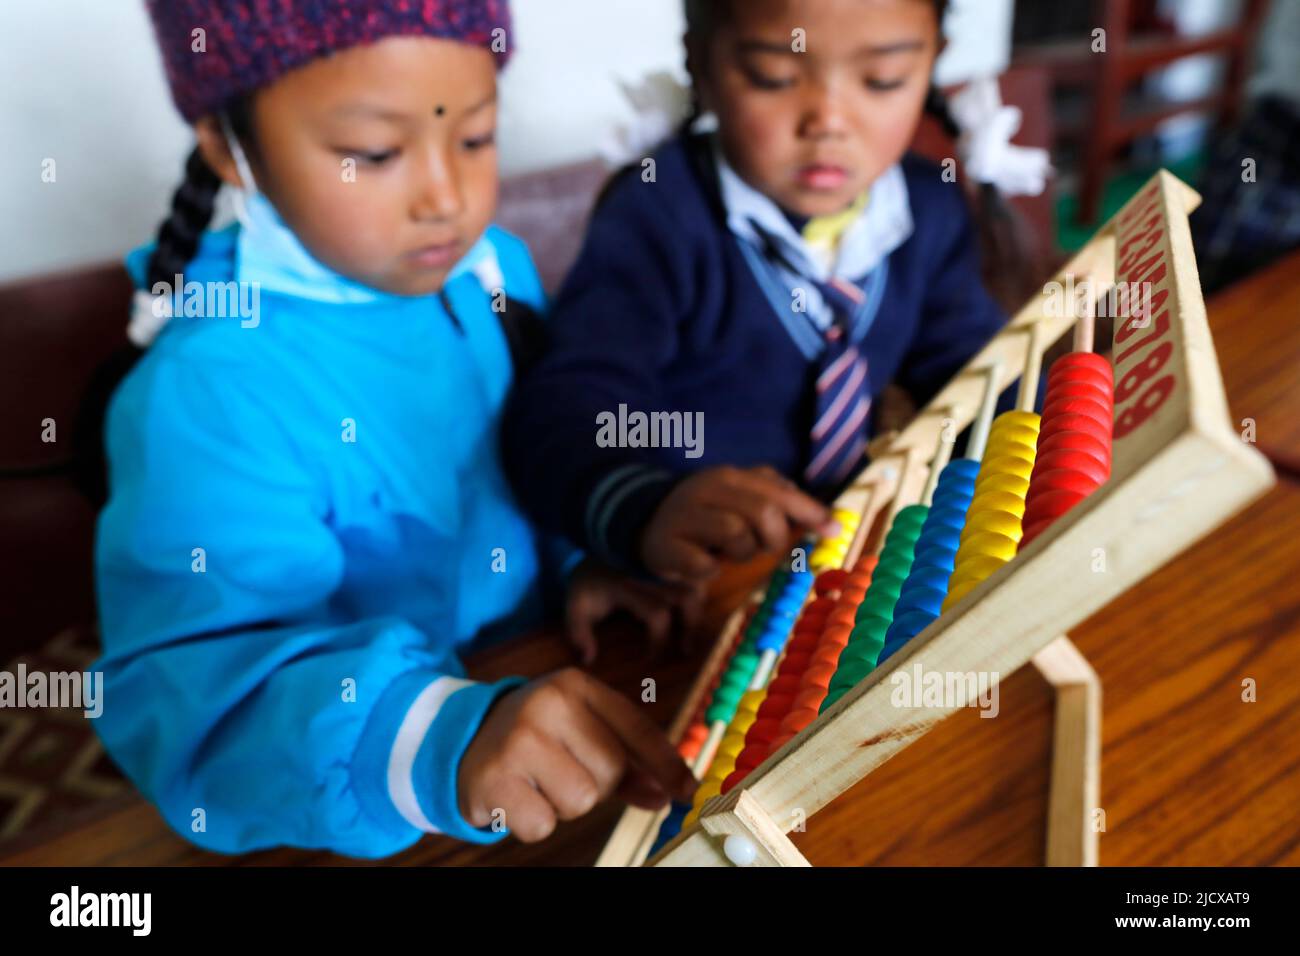 Primary school, students learning to count on an abacus, Charikot, Dolakha, Nepal, Asia Stock Photo